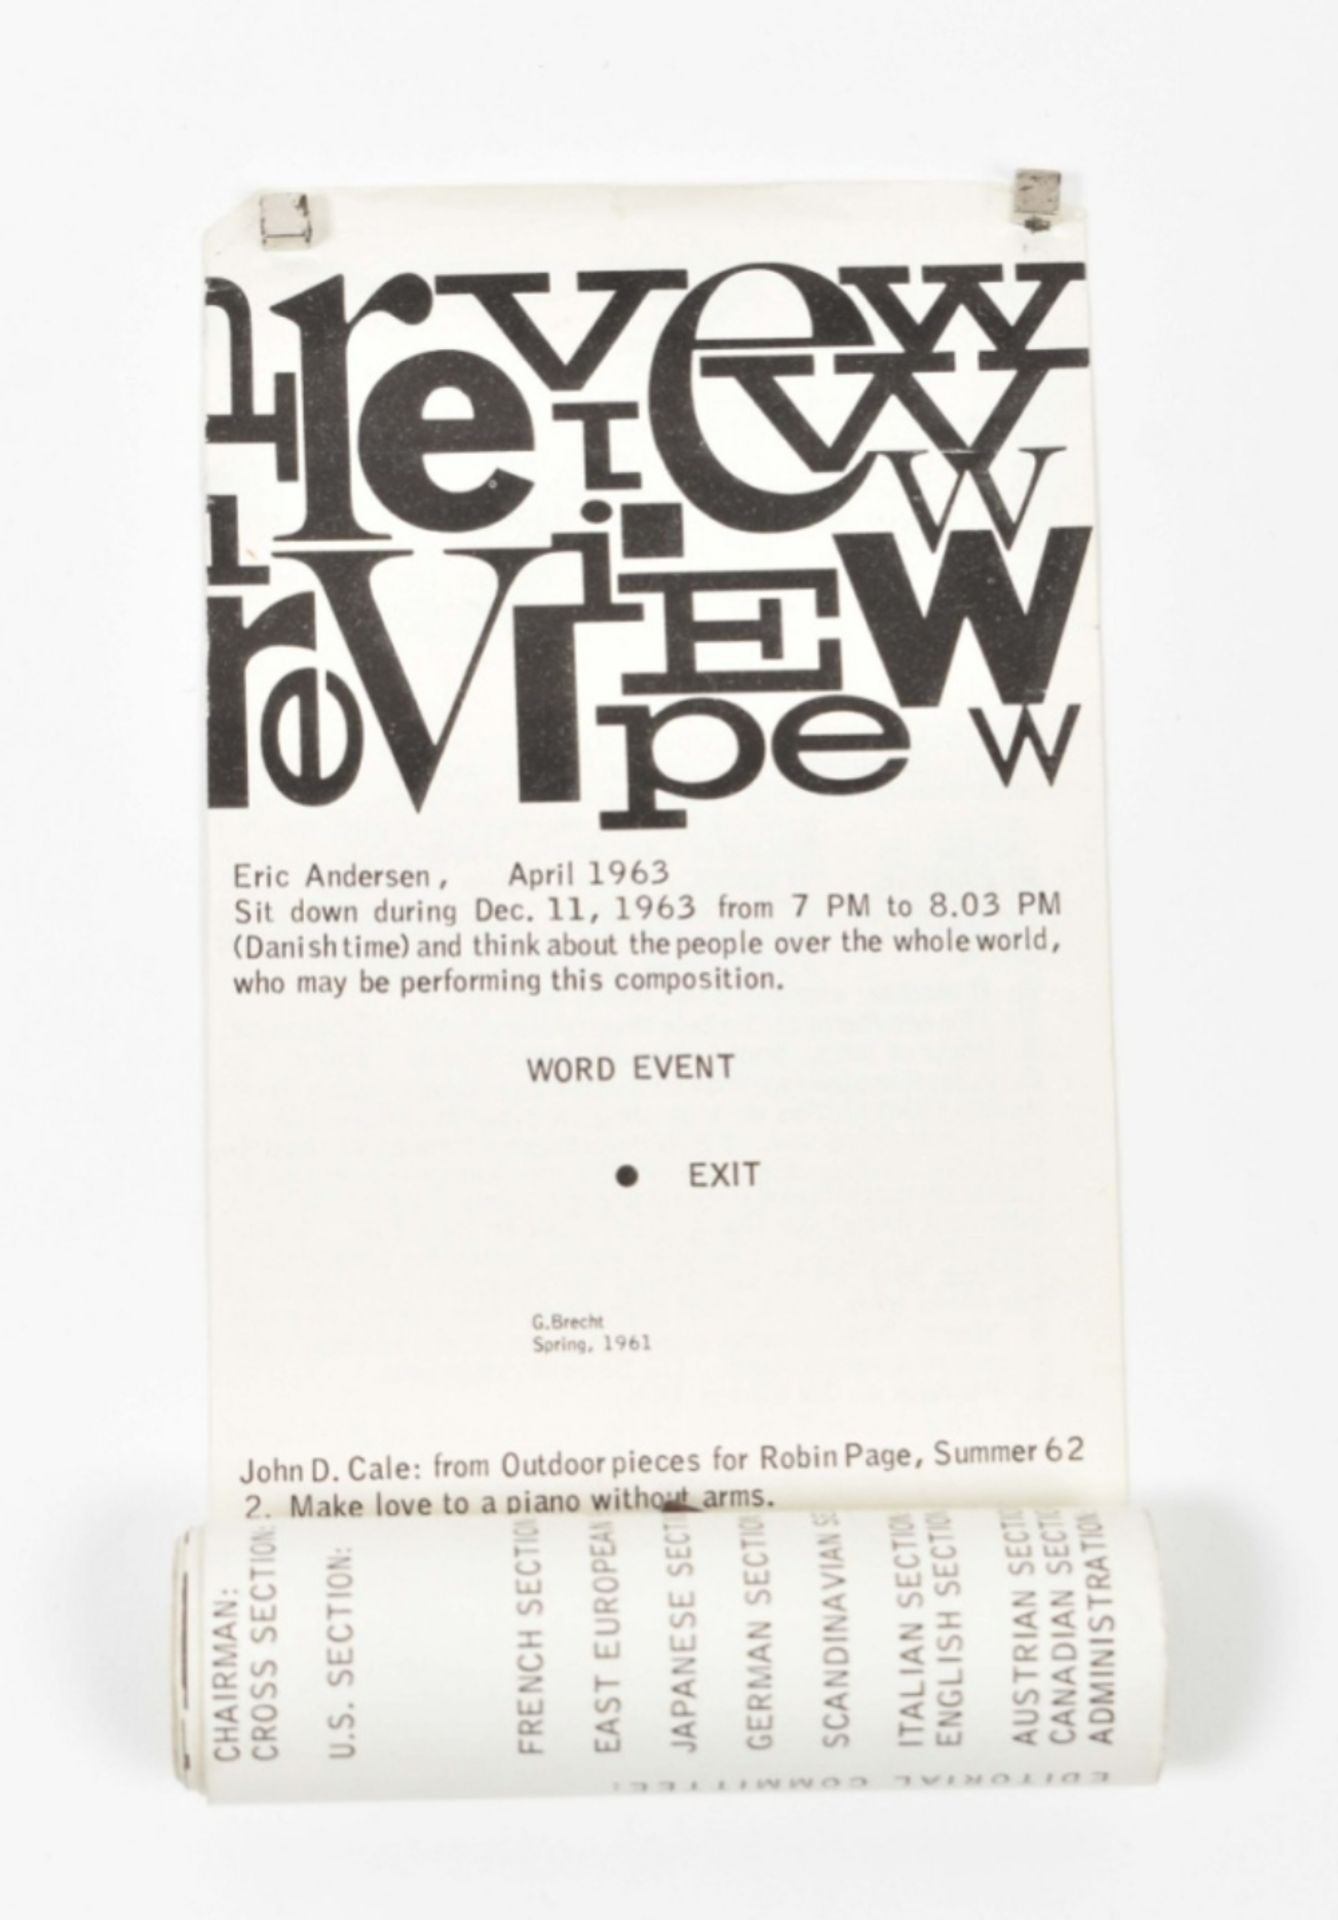 Fluxus Preview Review, 1963 - Image 3 of 7